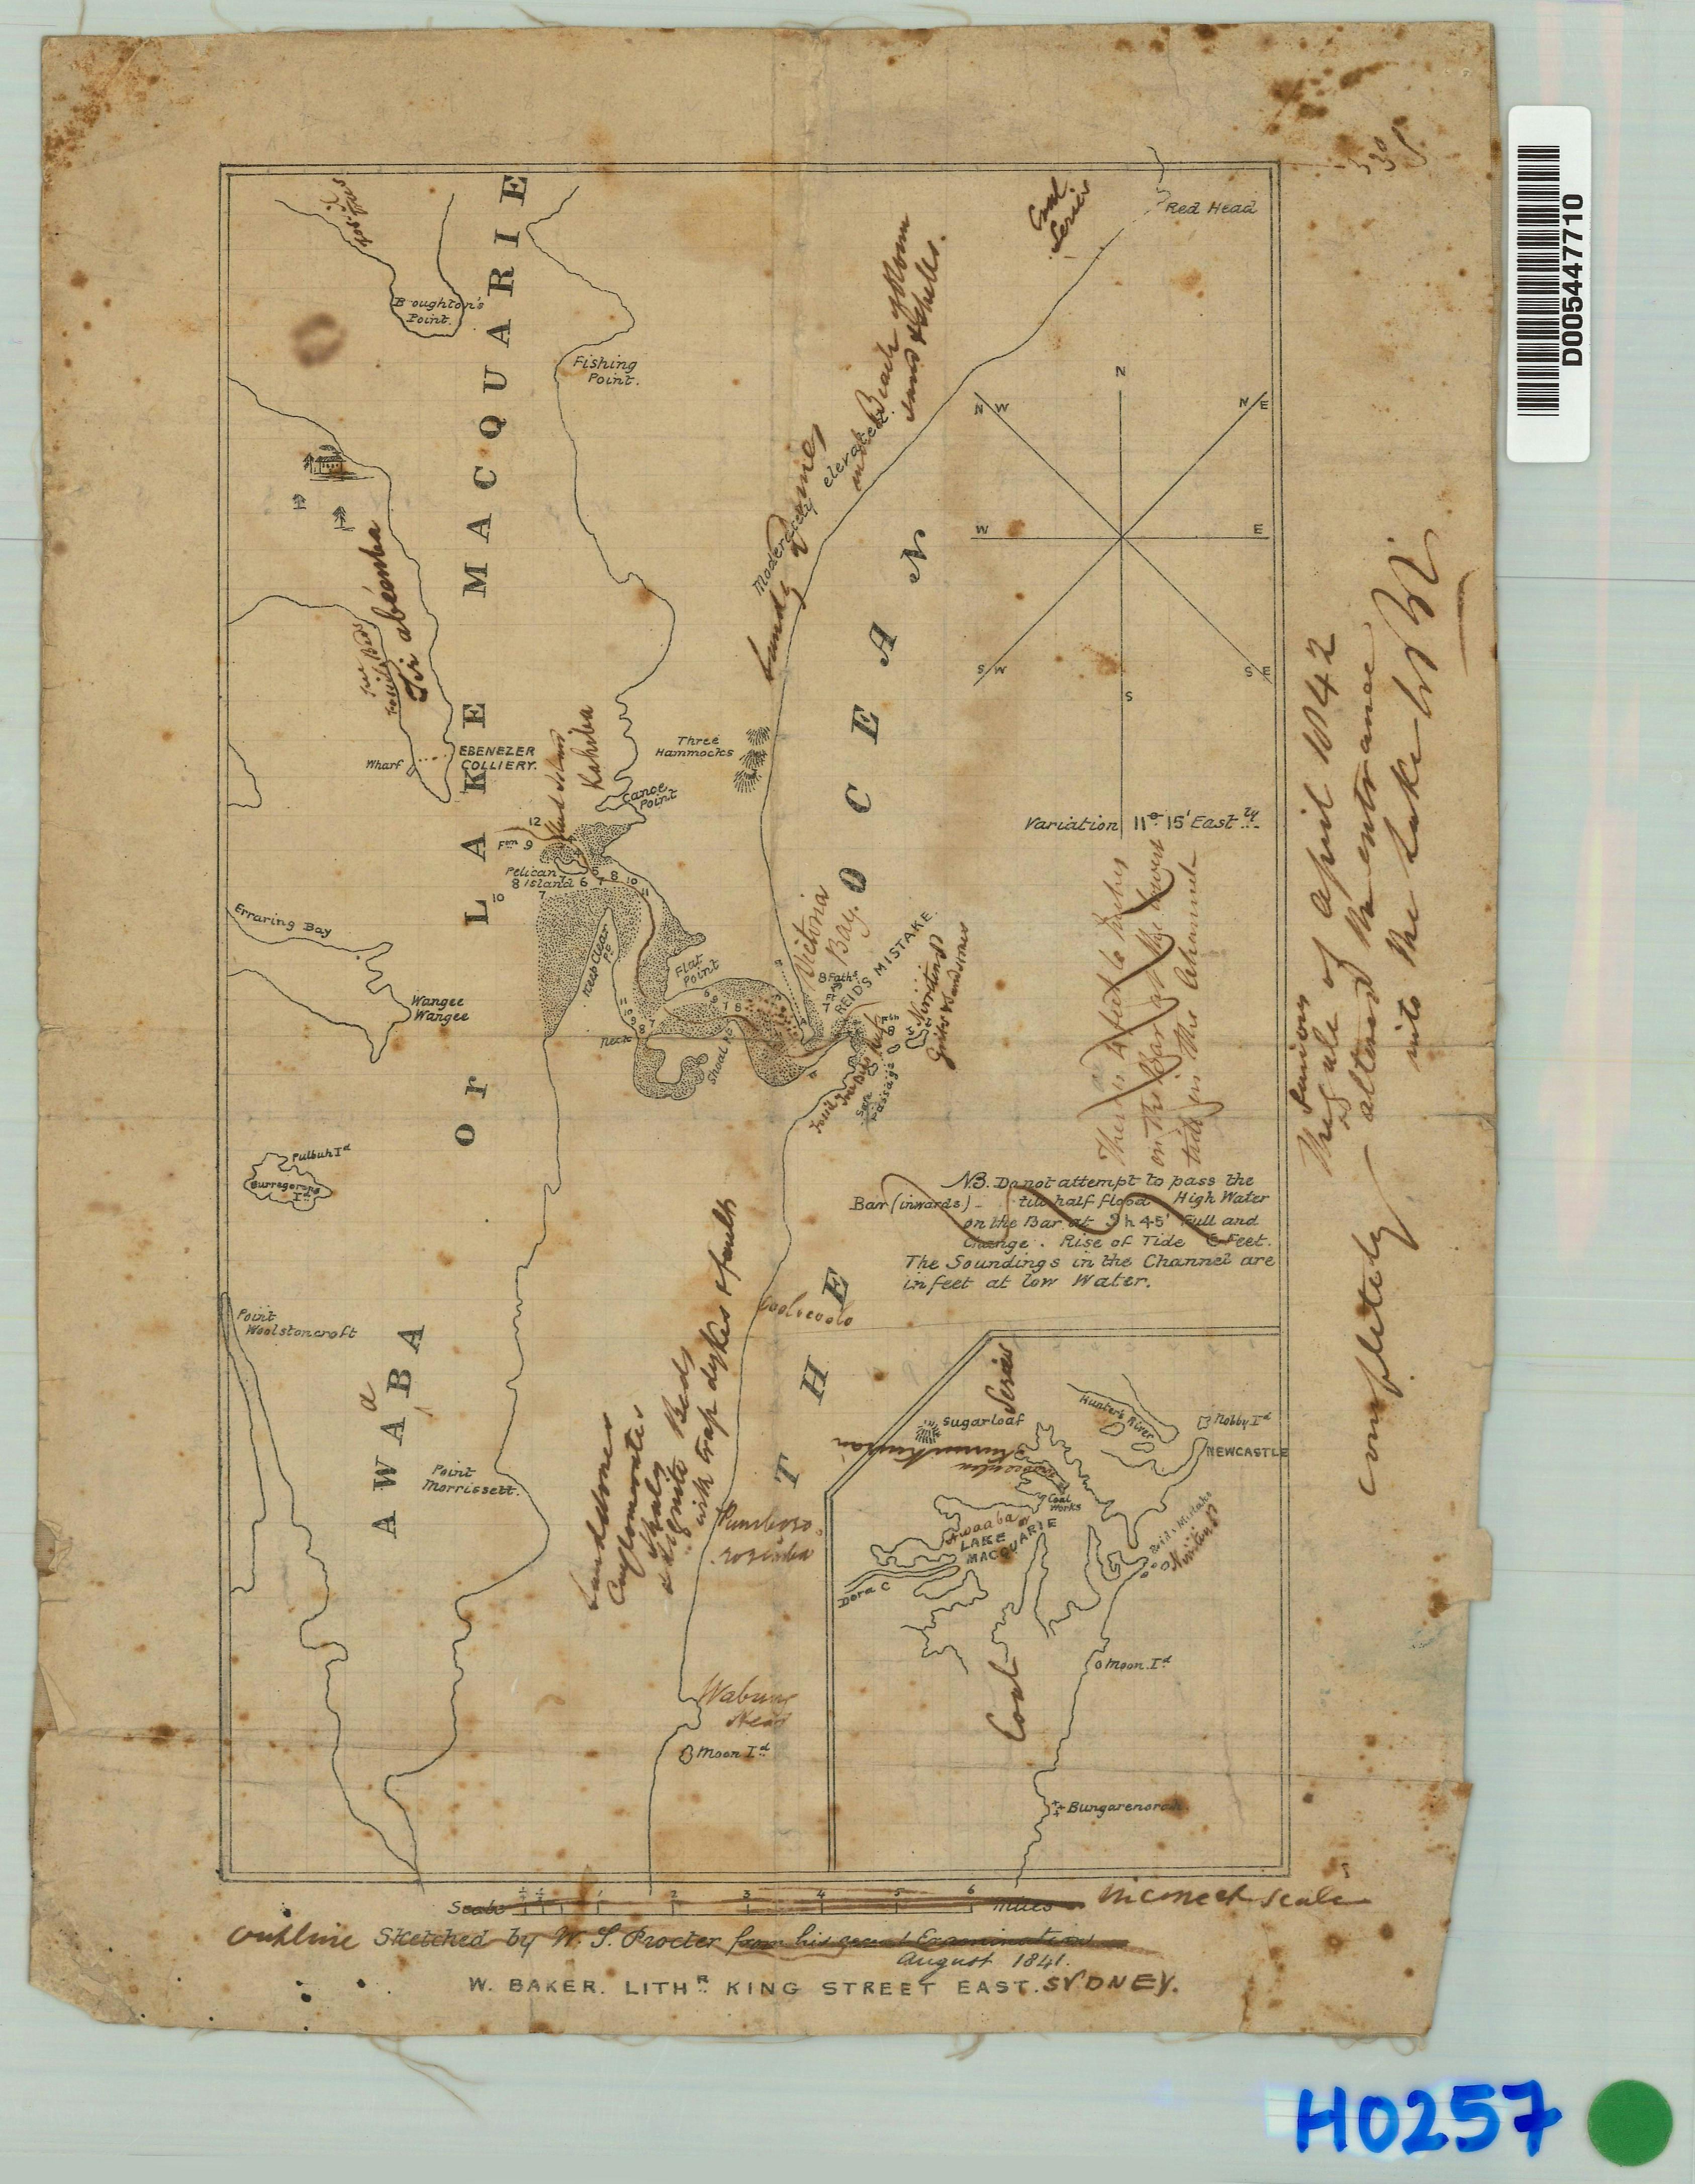 In a map sketched by W.Proctor in 1841, with extensive notes by the Reverend W.B. Clarke the area is given the name ‘Keep Clear Pt’